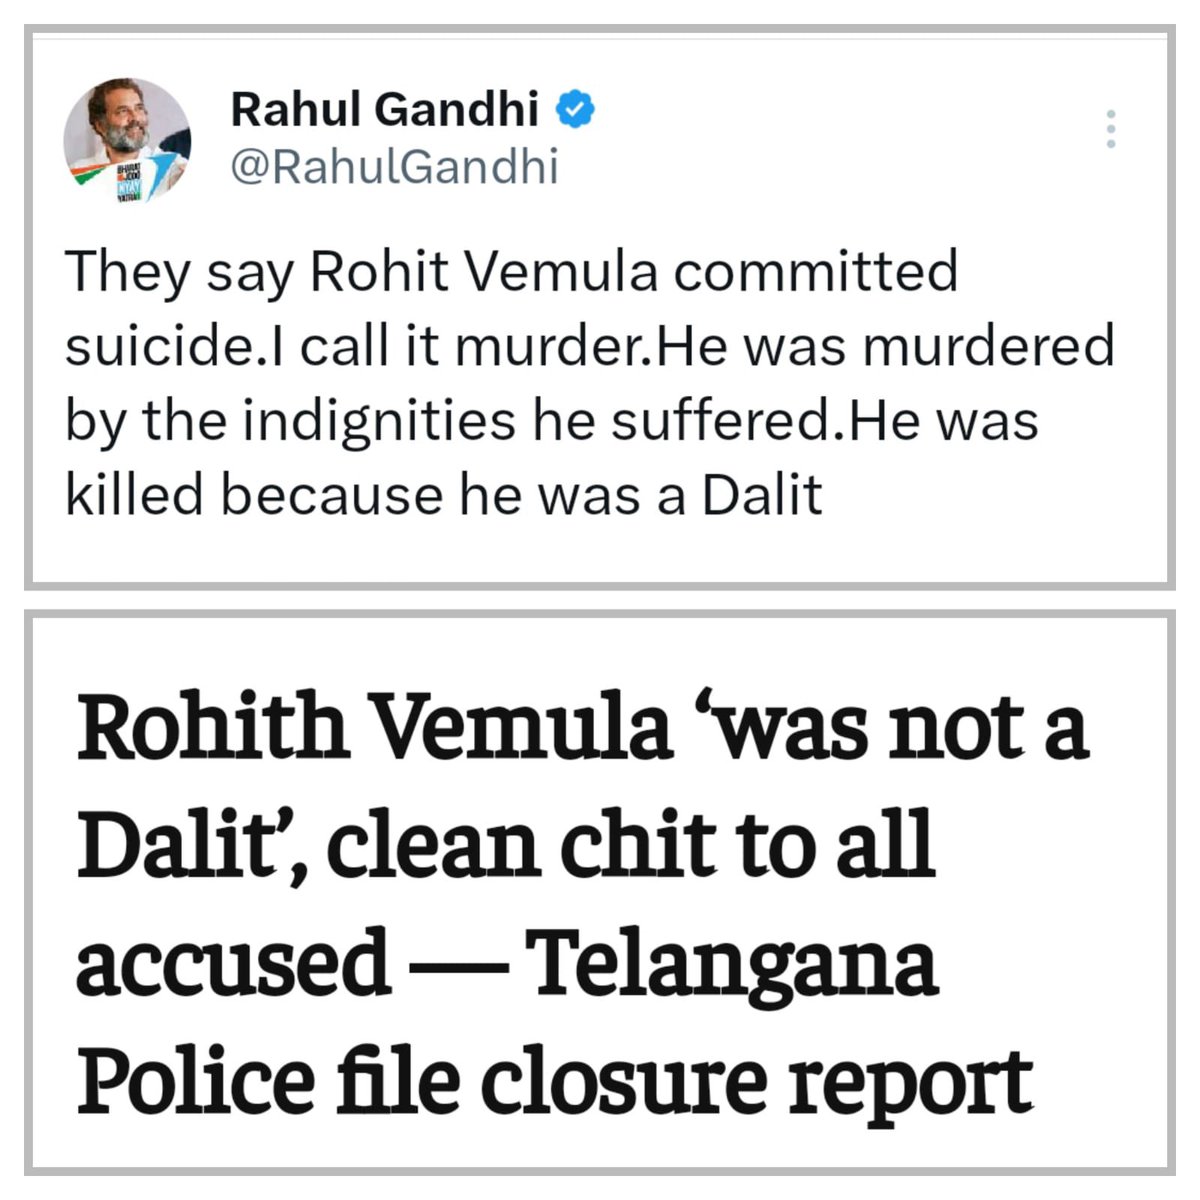 Rahul Gandhi and the entire Congress ecosystem blamed @smritiirani and @narendramodi for Rohith Vemula's death.

Today, the Telangana Police have exposed the ecosystem.

Closure report from Telangana Police:

- Police claim that Rohith was not a Dalit.

- He died because he was…